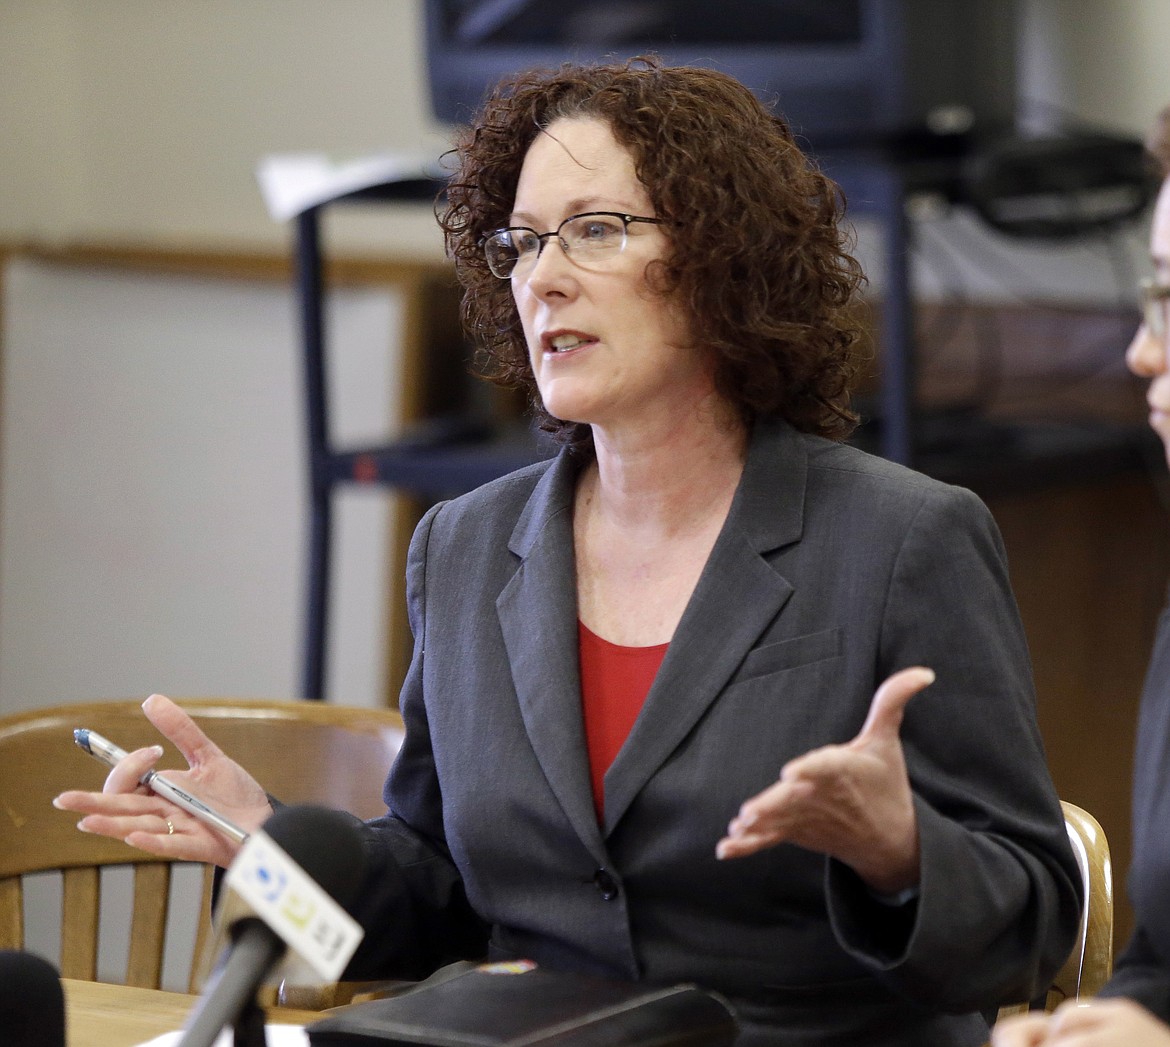 Oregon Rep. Val Hoyle, D-Eugene, speaks during a legislative forum at the Capitol in Salem, Ore., on Jan. 27, 2015. Hoyle is running for Oregon's 4th District U.S. House seat against Republican Alek Skarlatos. (AP Photo/Don Ryan, File)